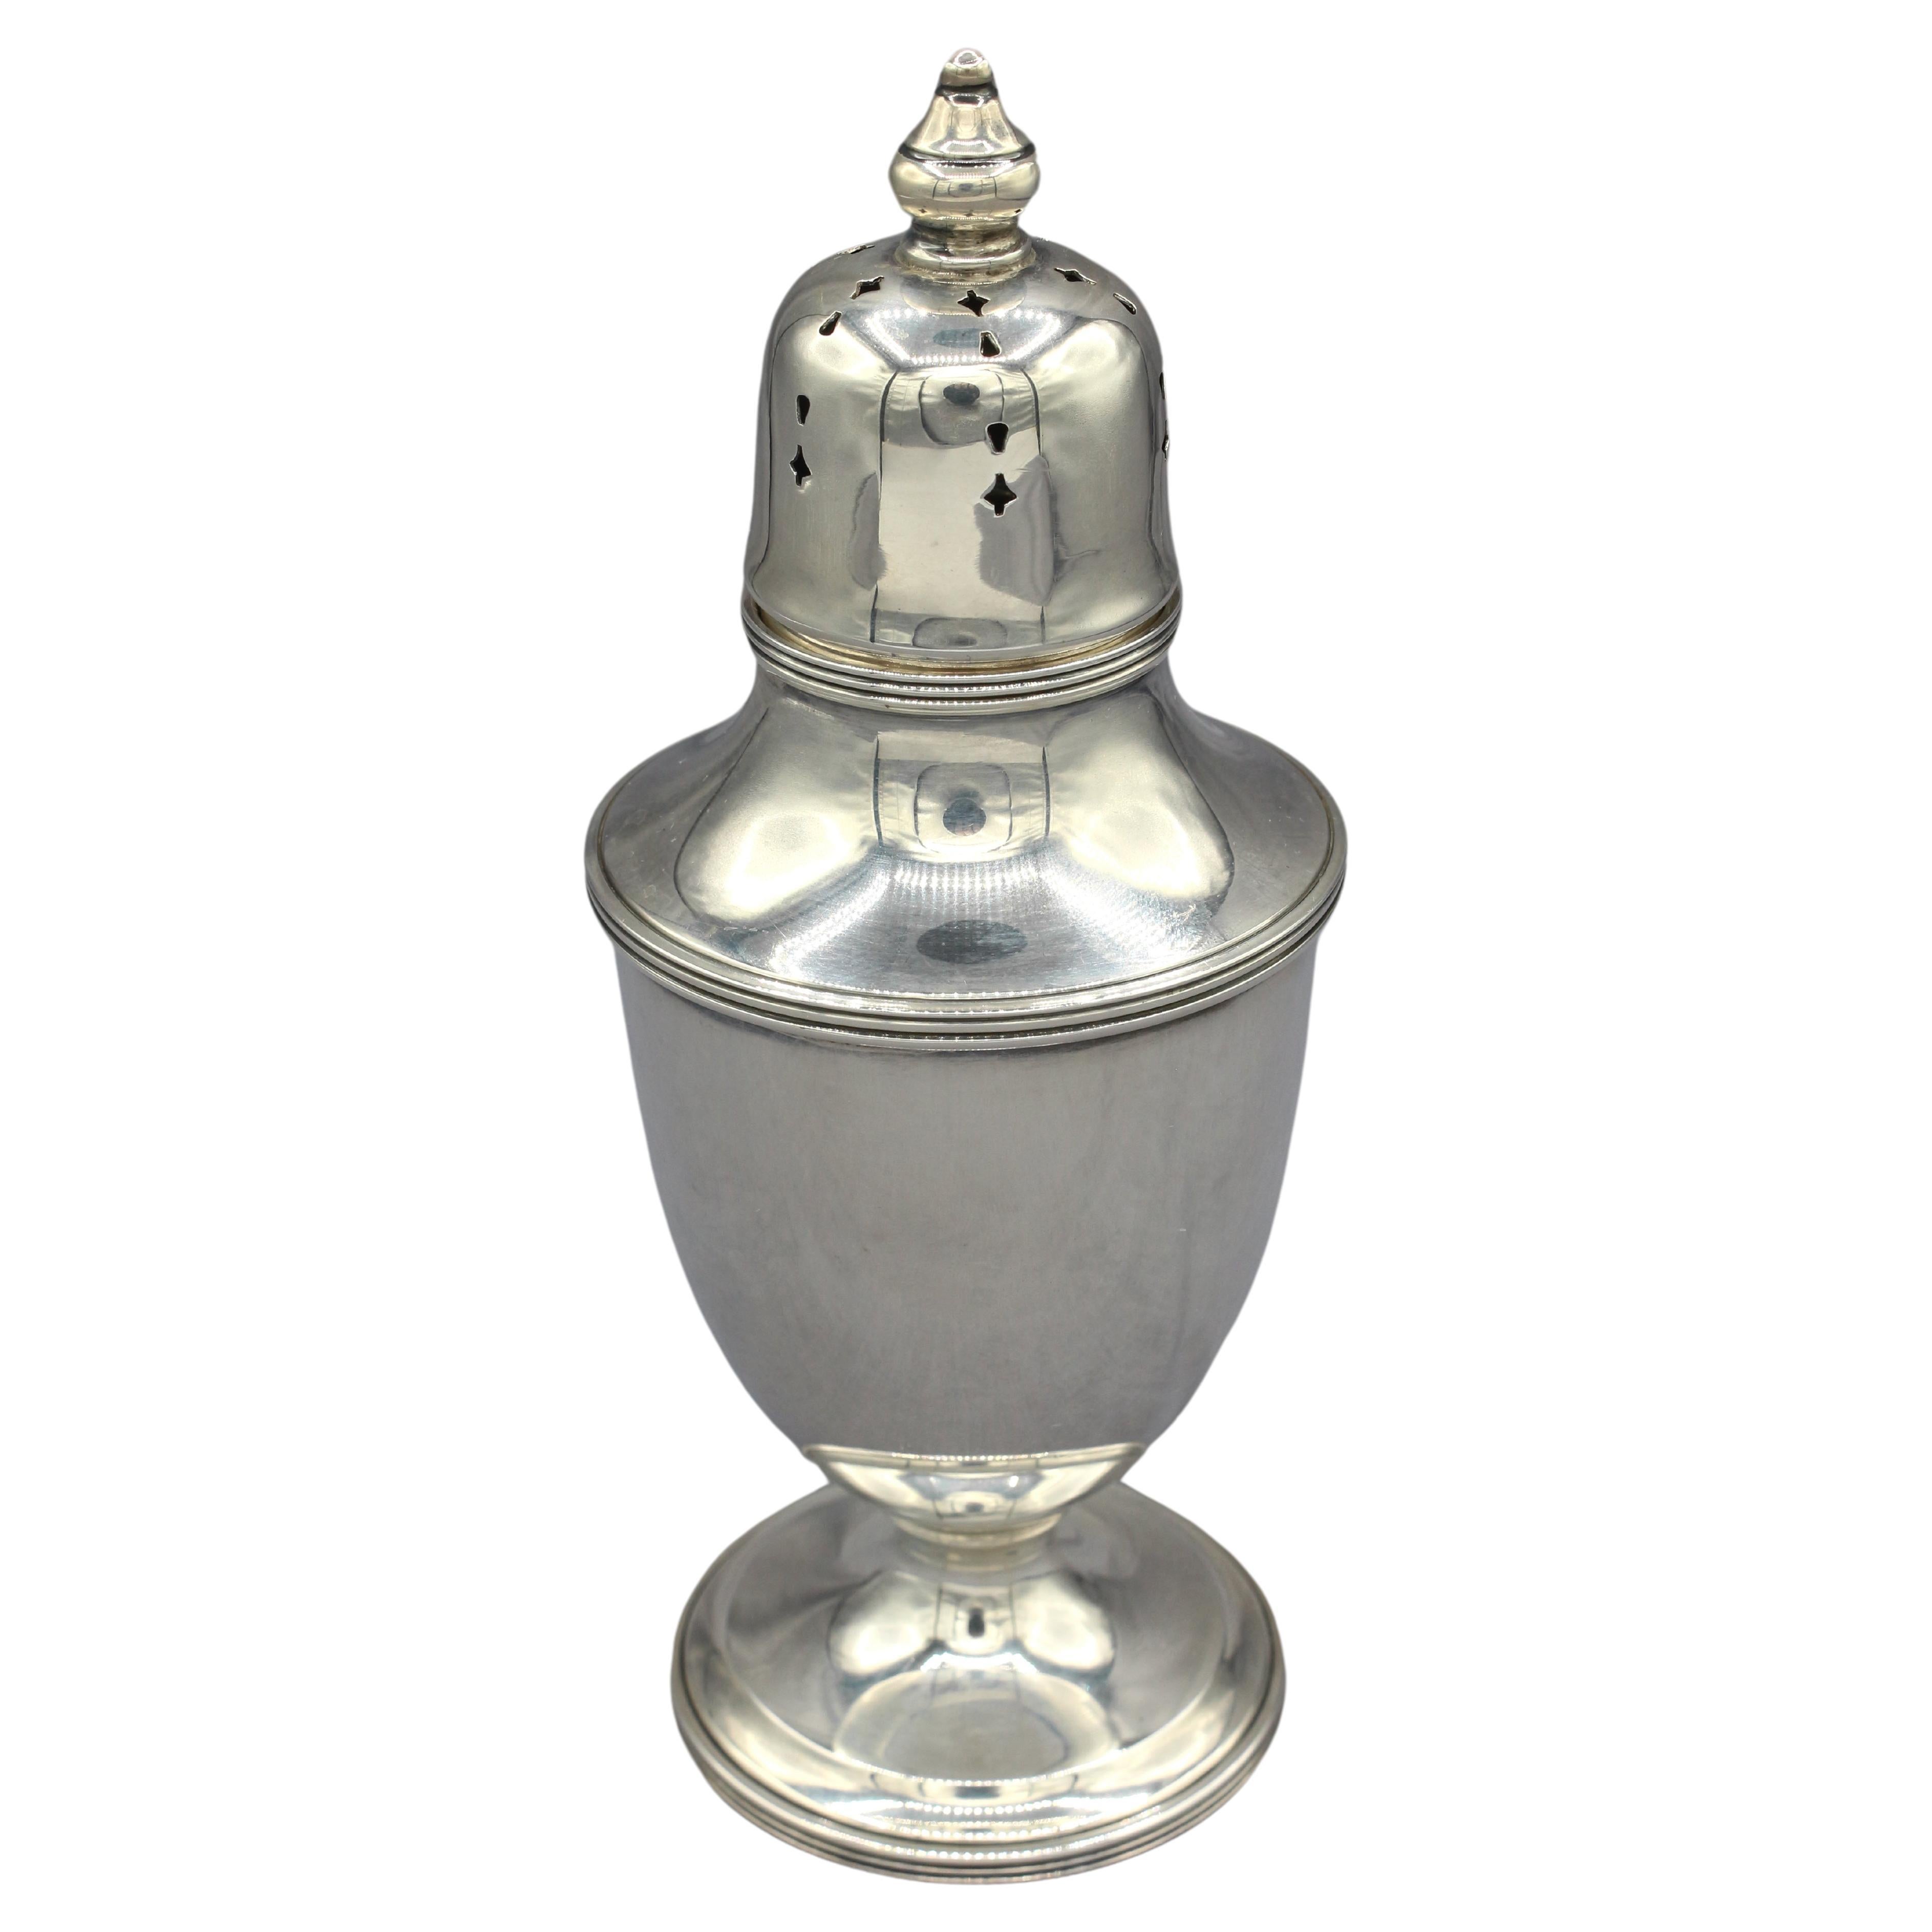 Circa 1940s Sterling Silver Sugar Caster by Mueck & Cary